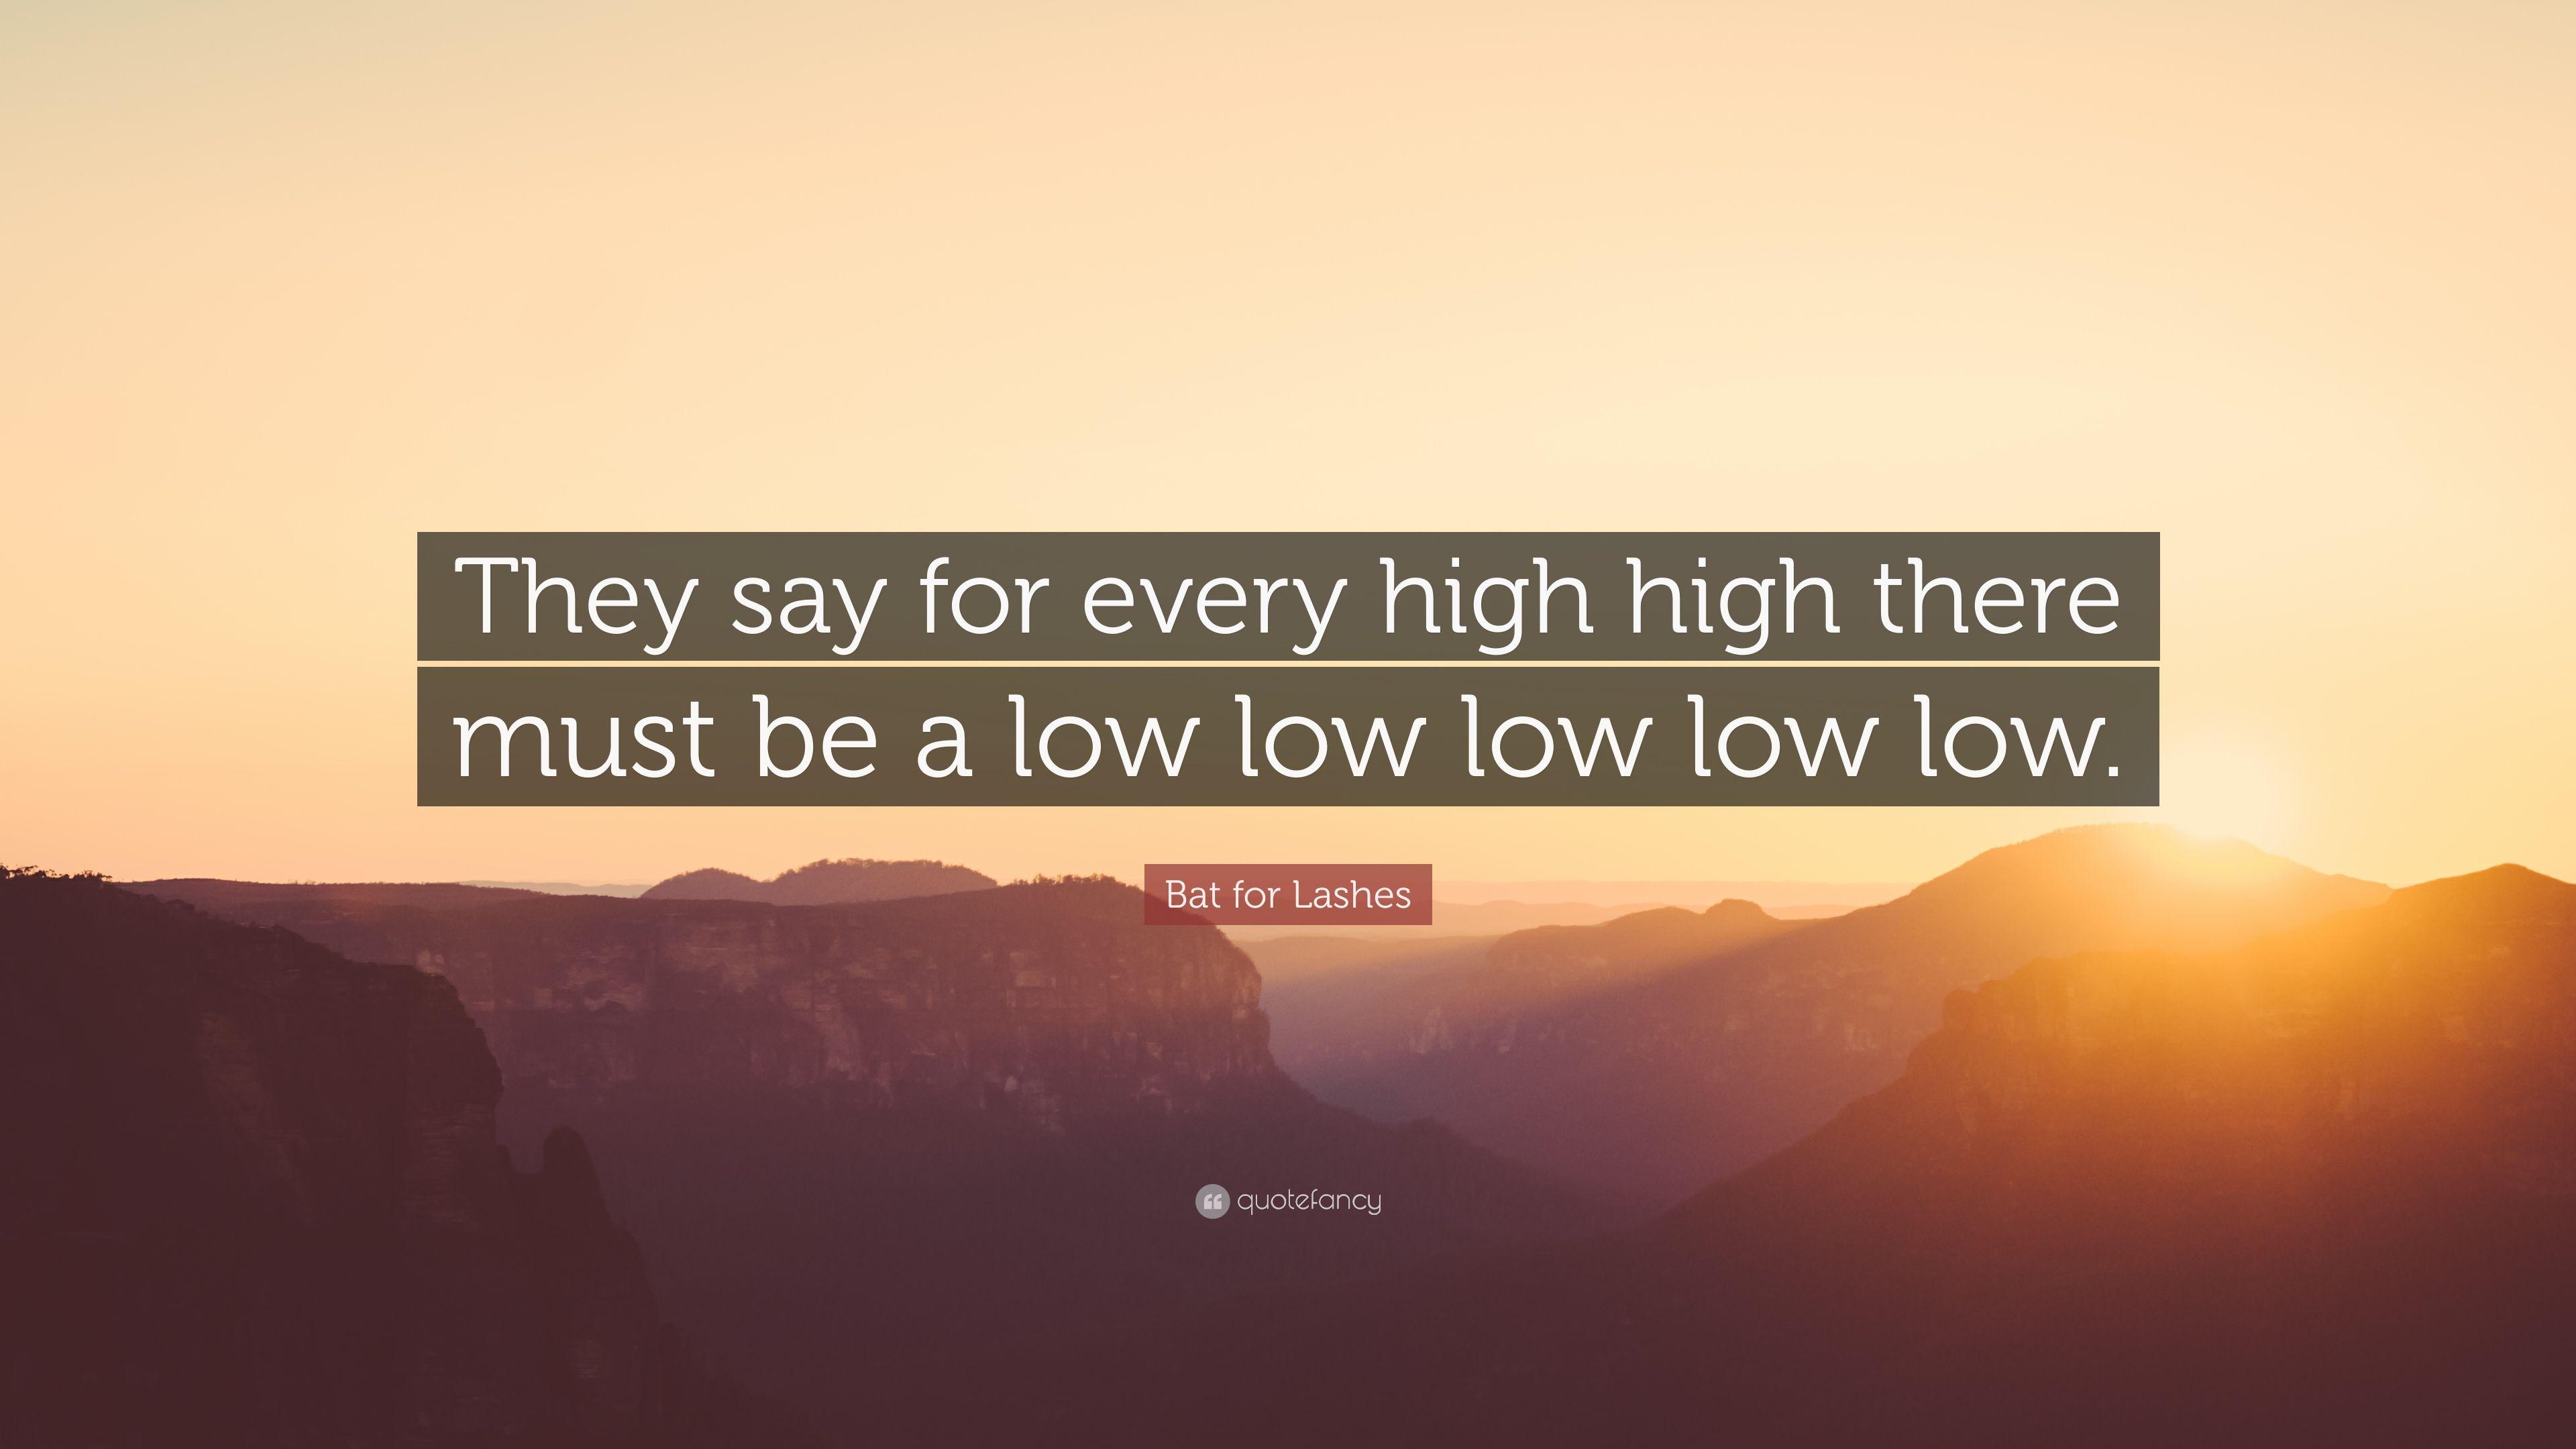 Bat for Lashes Quote: "They say for every high high there must be a.